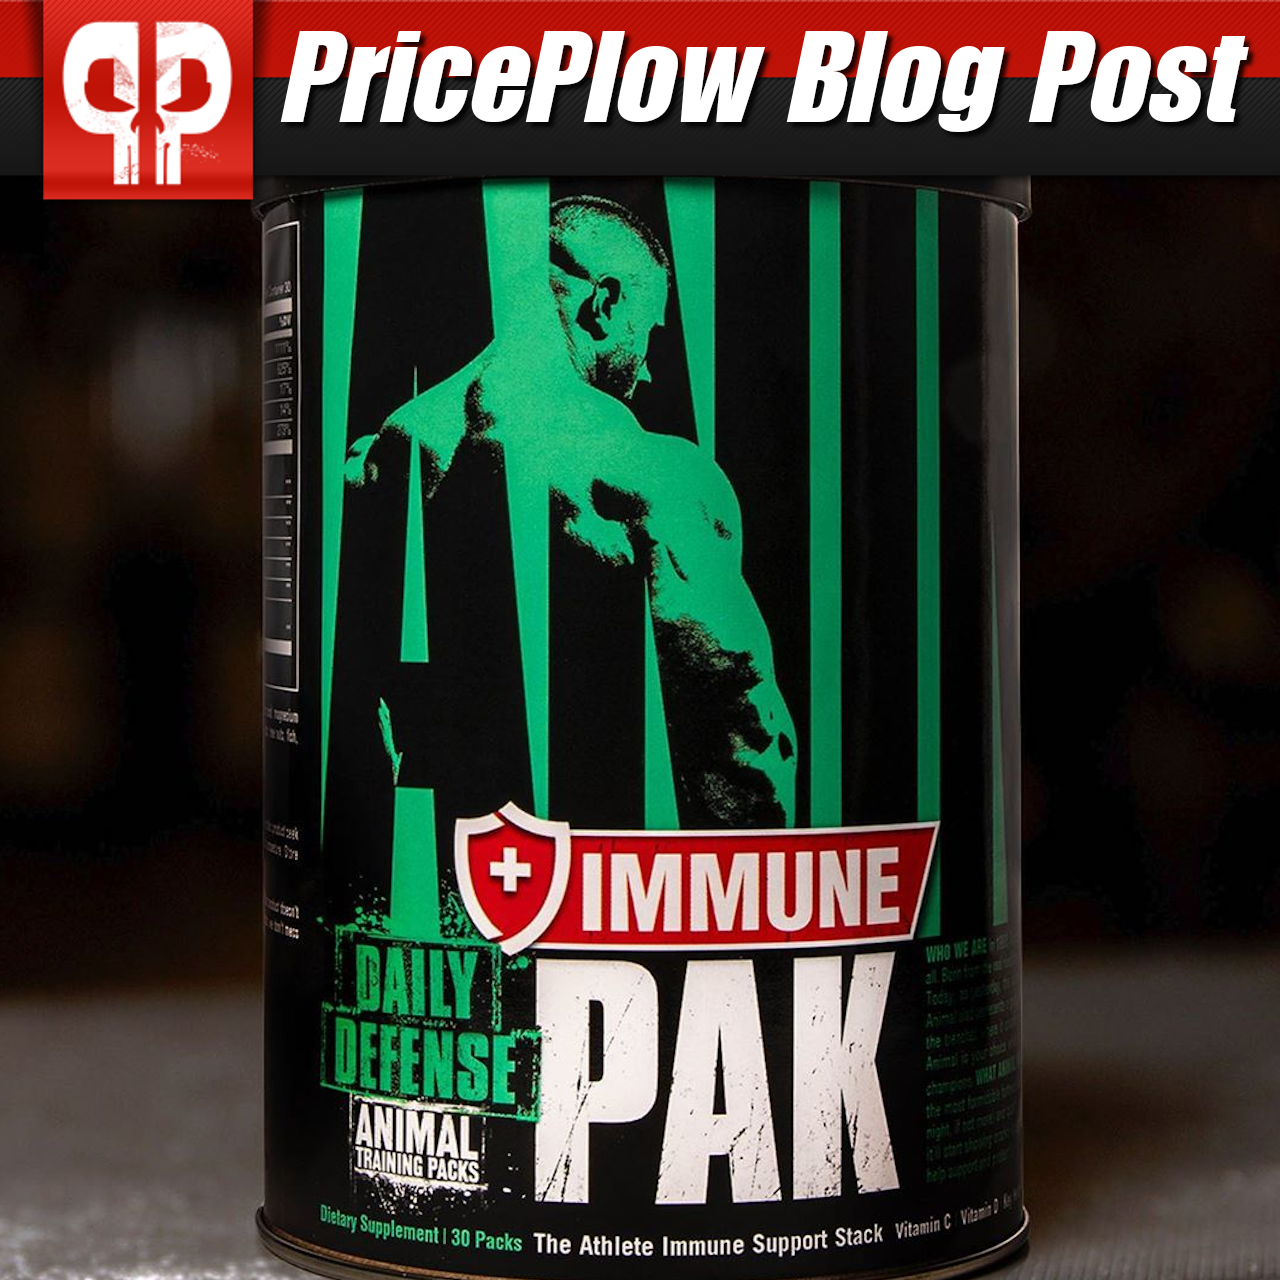 Animal Cuts POWDER: A Fat-Burning Drink for the Athletes at Animal